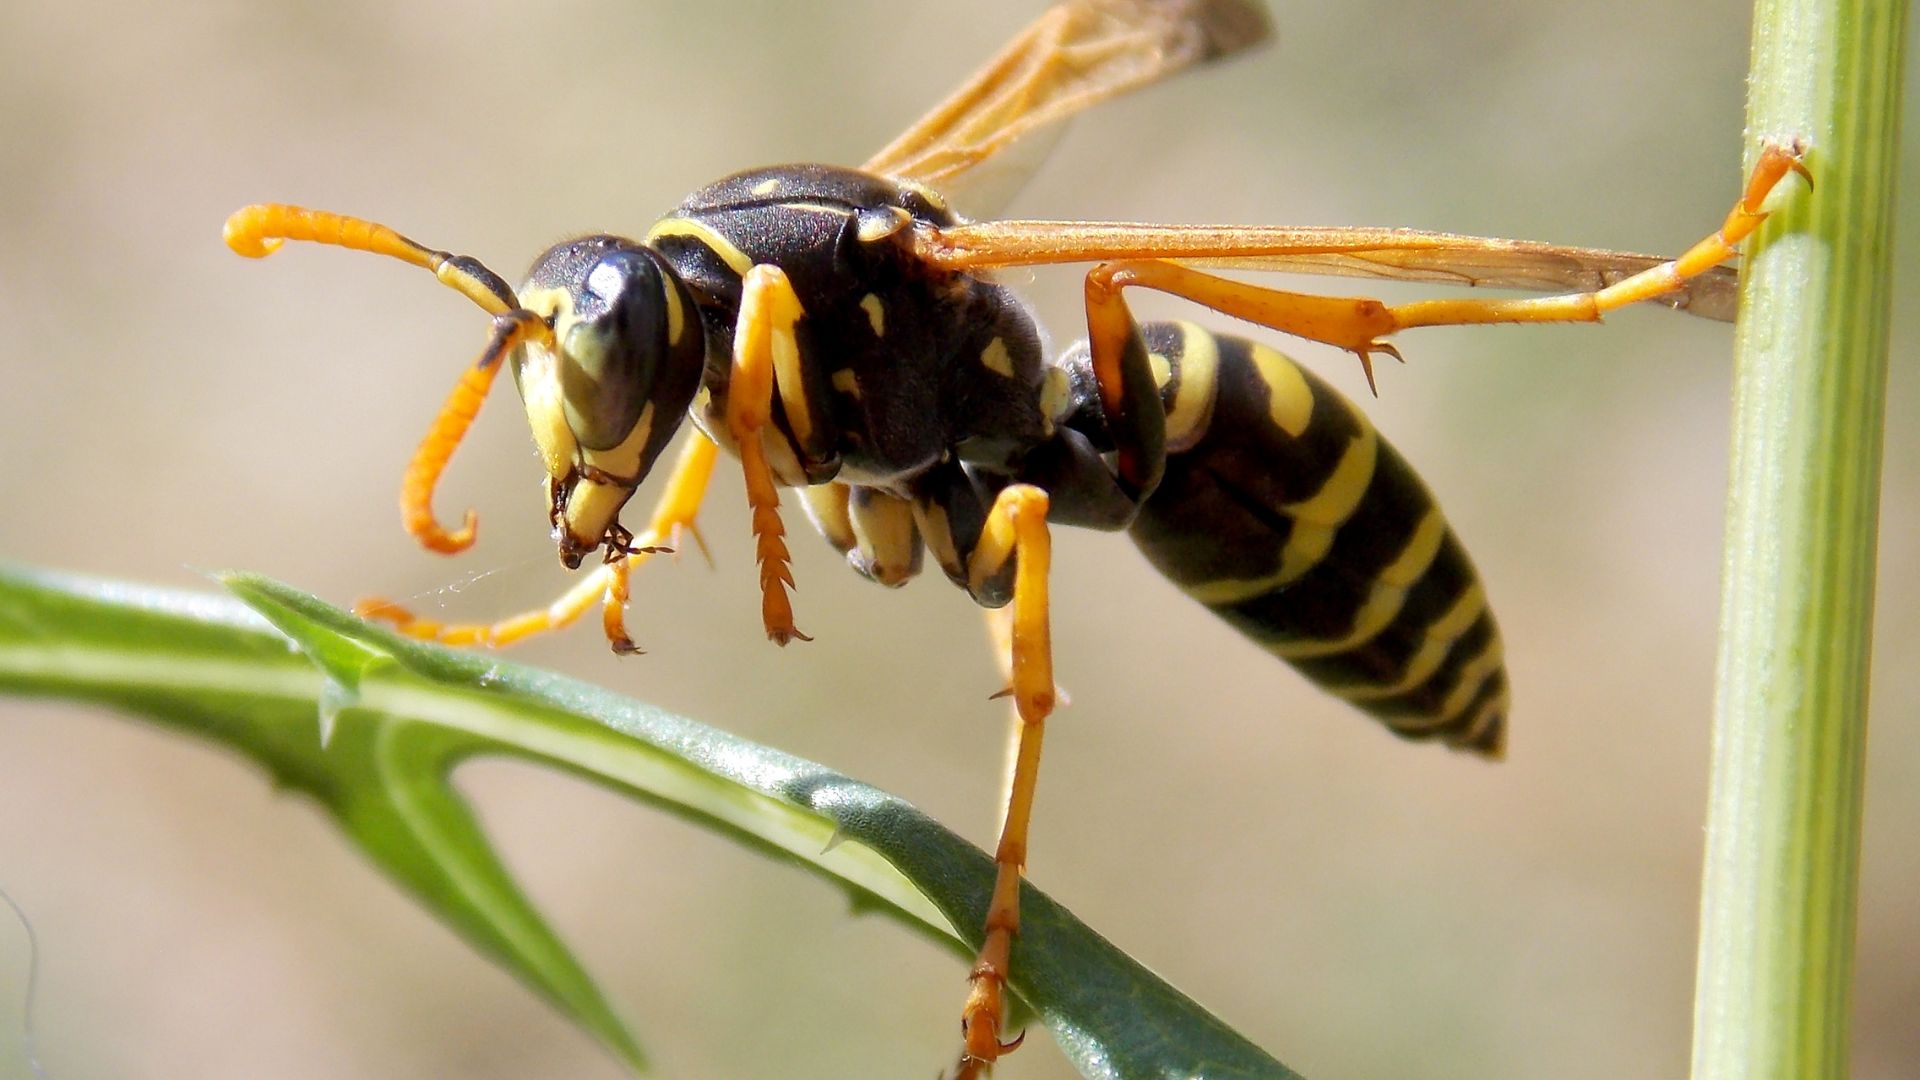 Wasps Absolutely Hate The Scent Of These 10 Plants, So Make Sure To Plant Them This Summer